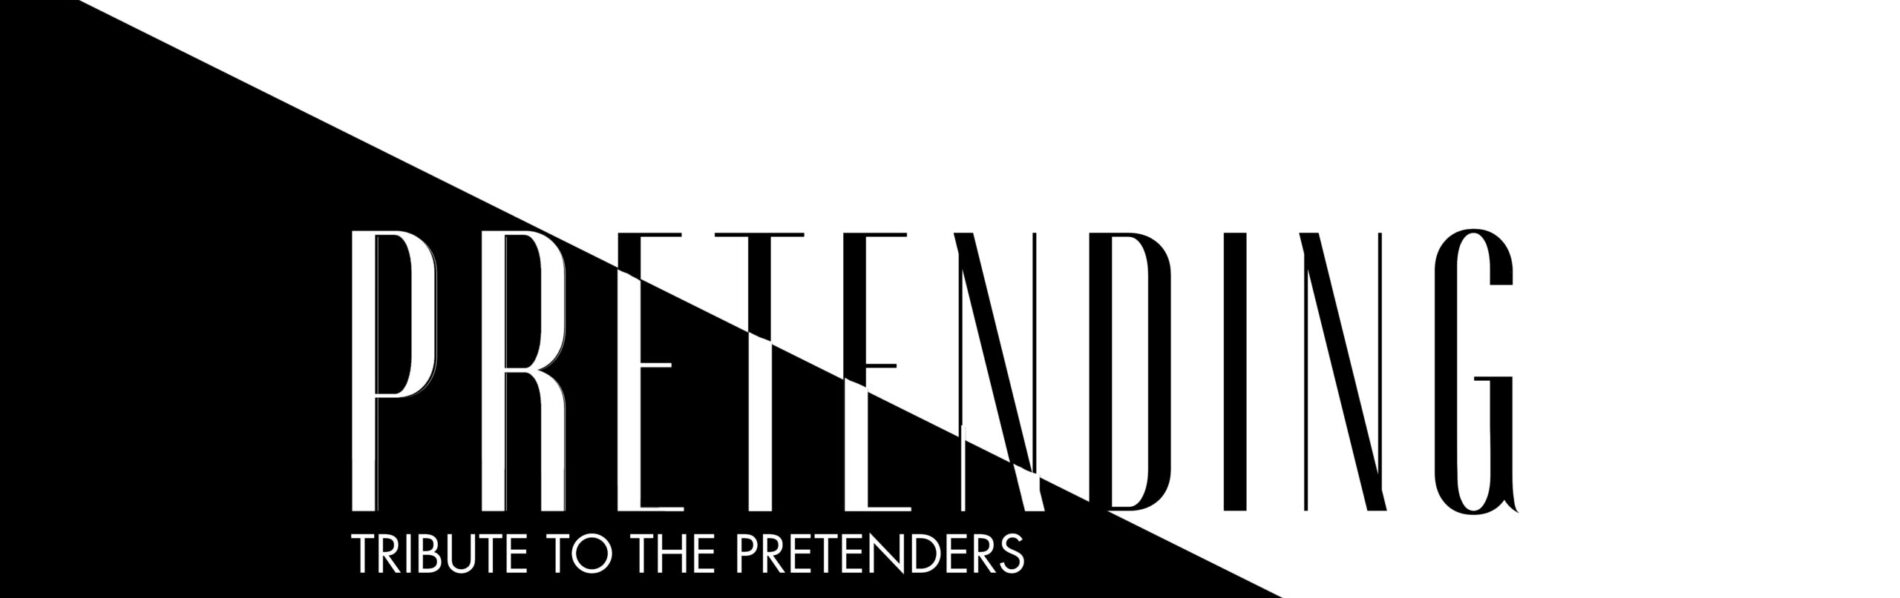 We are the #1 Tribute to The Pretenders